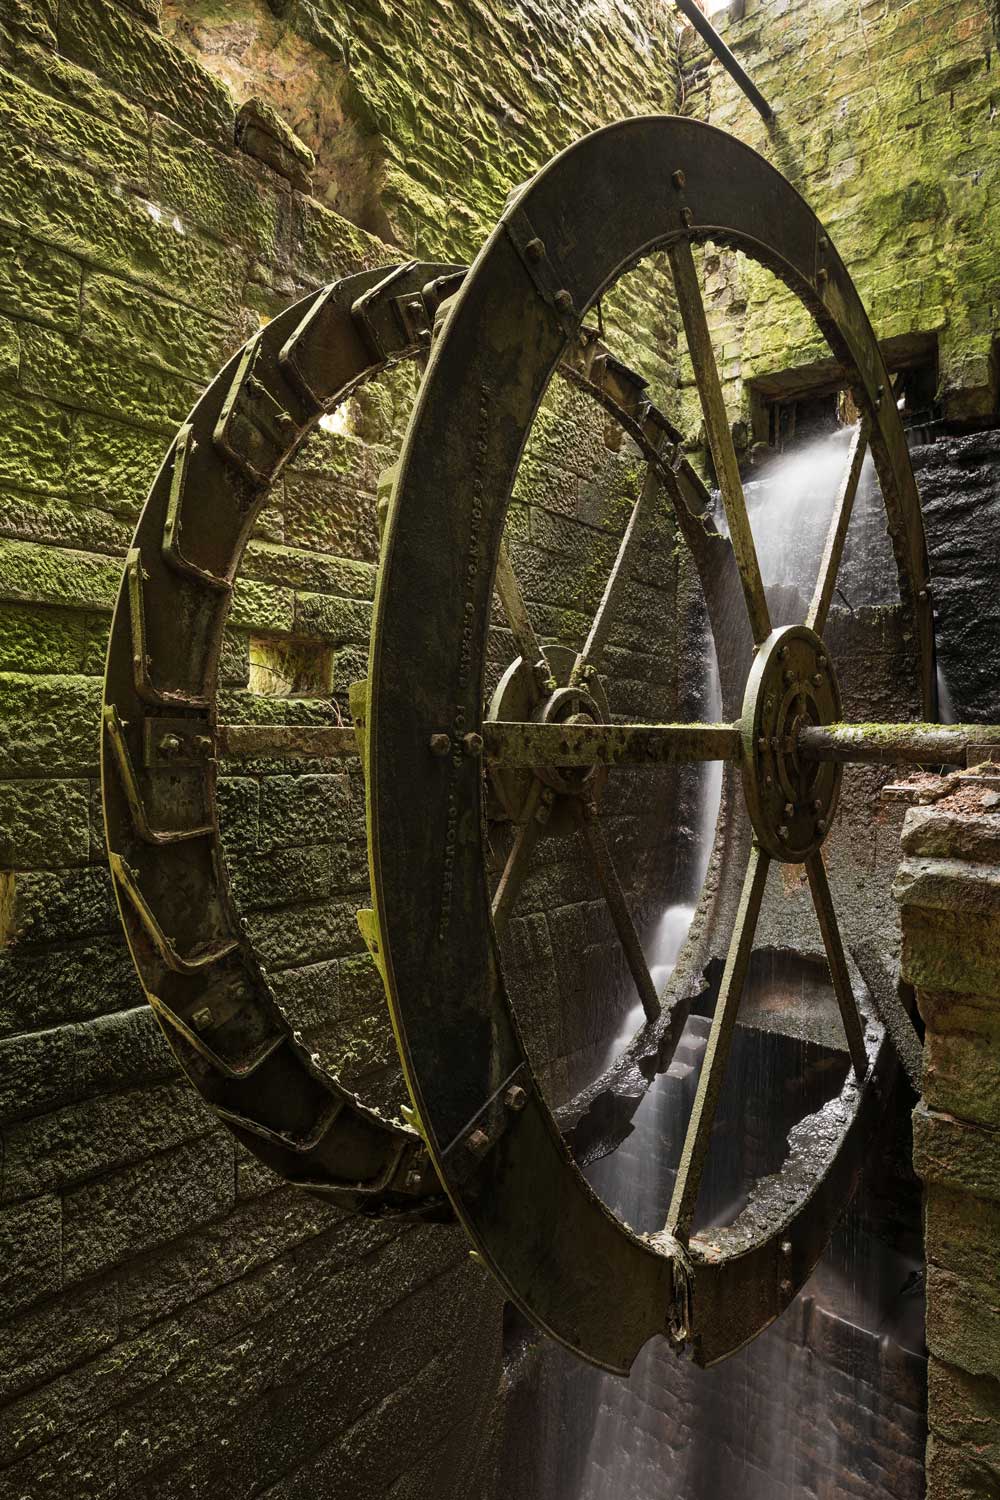 A photograph of a historic cast iron water wheel